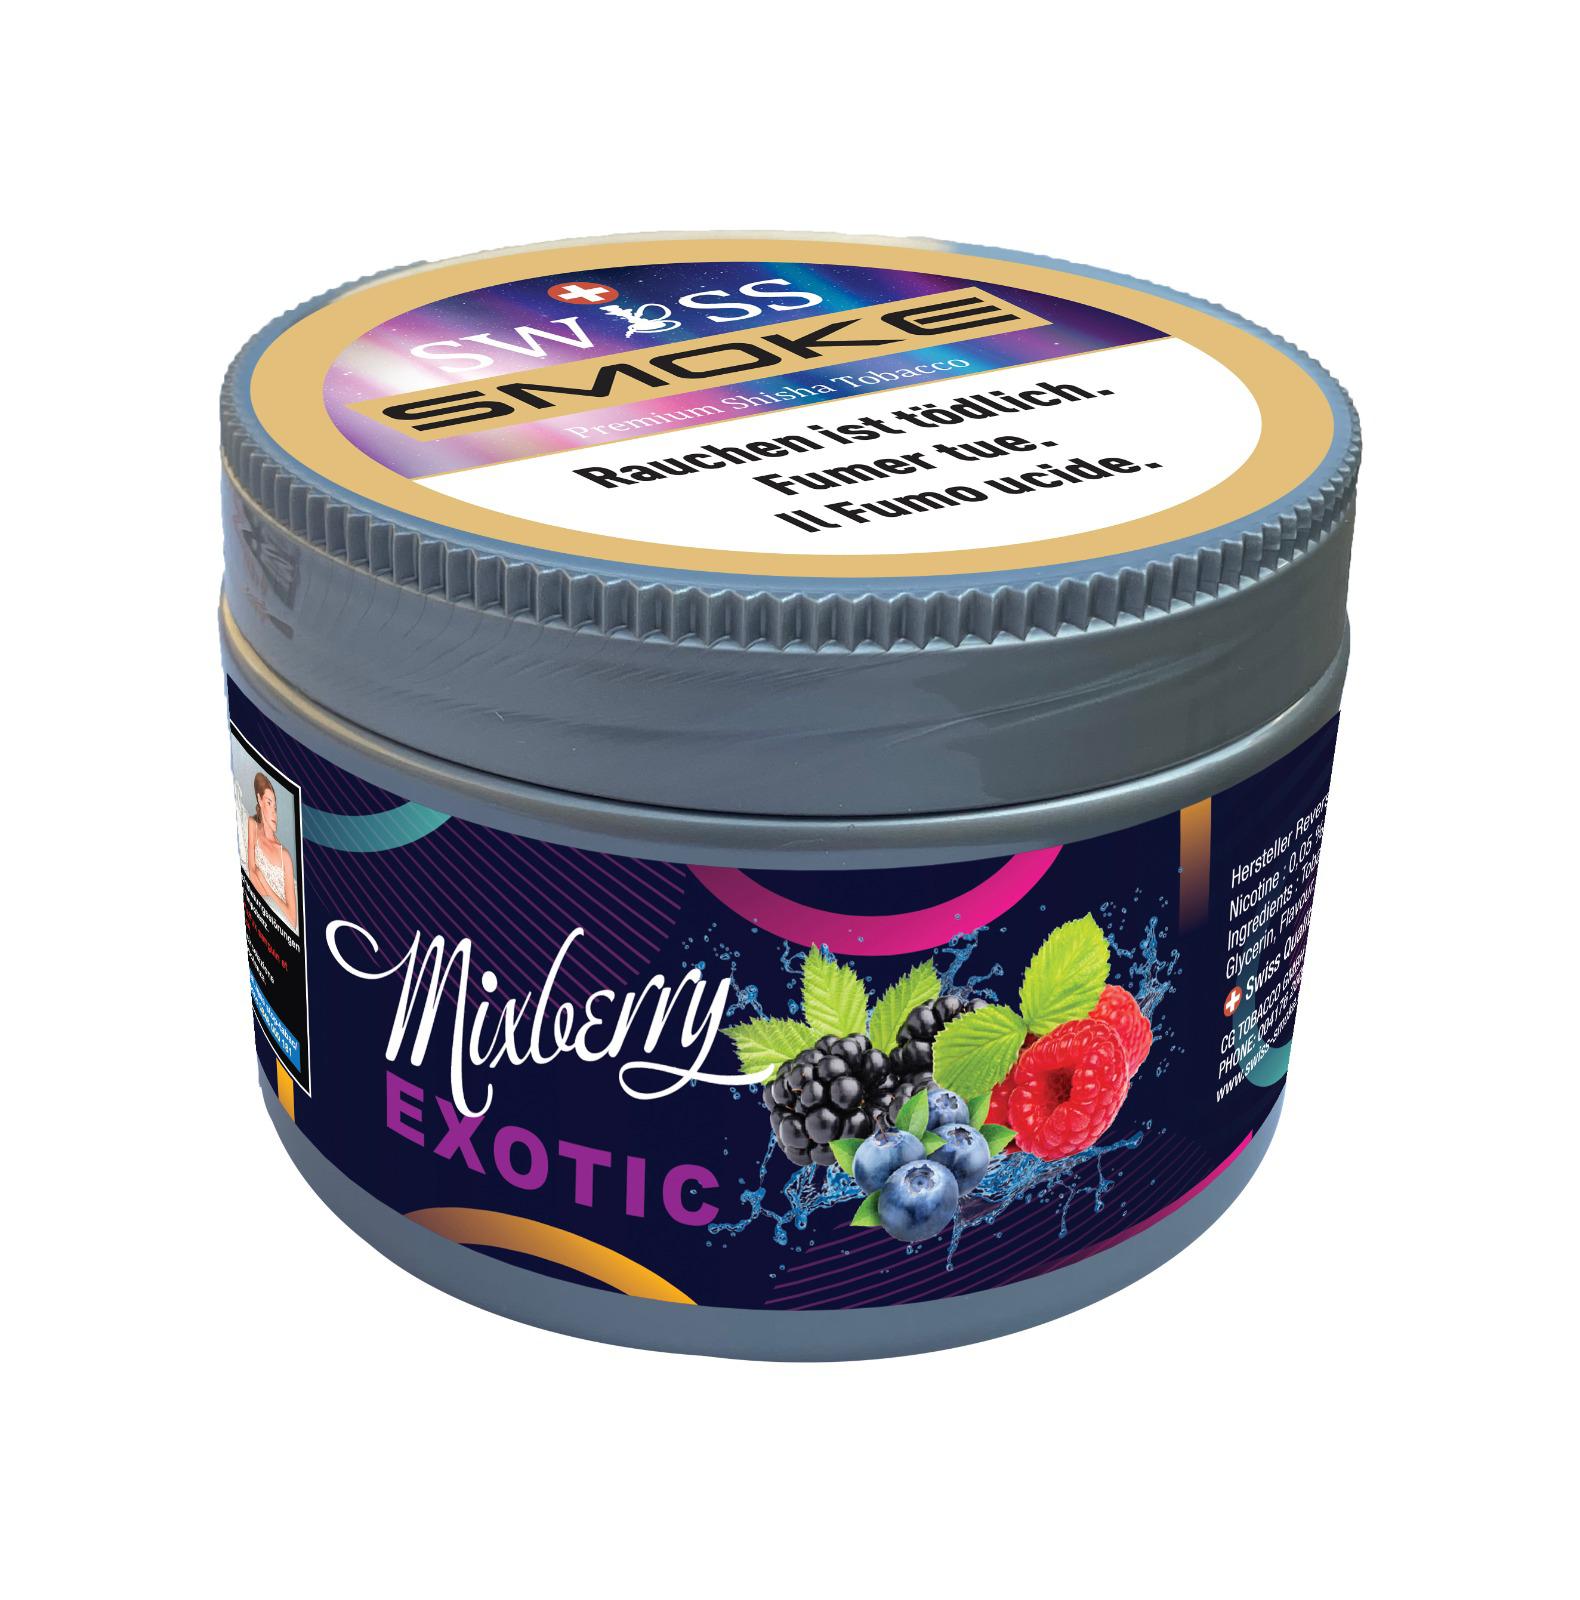 Mixberry Exotic 100g